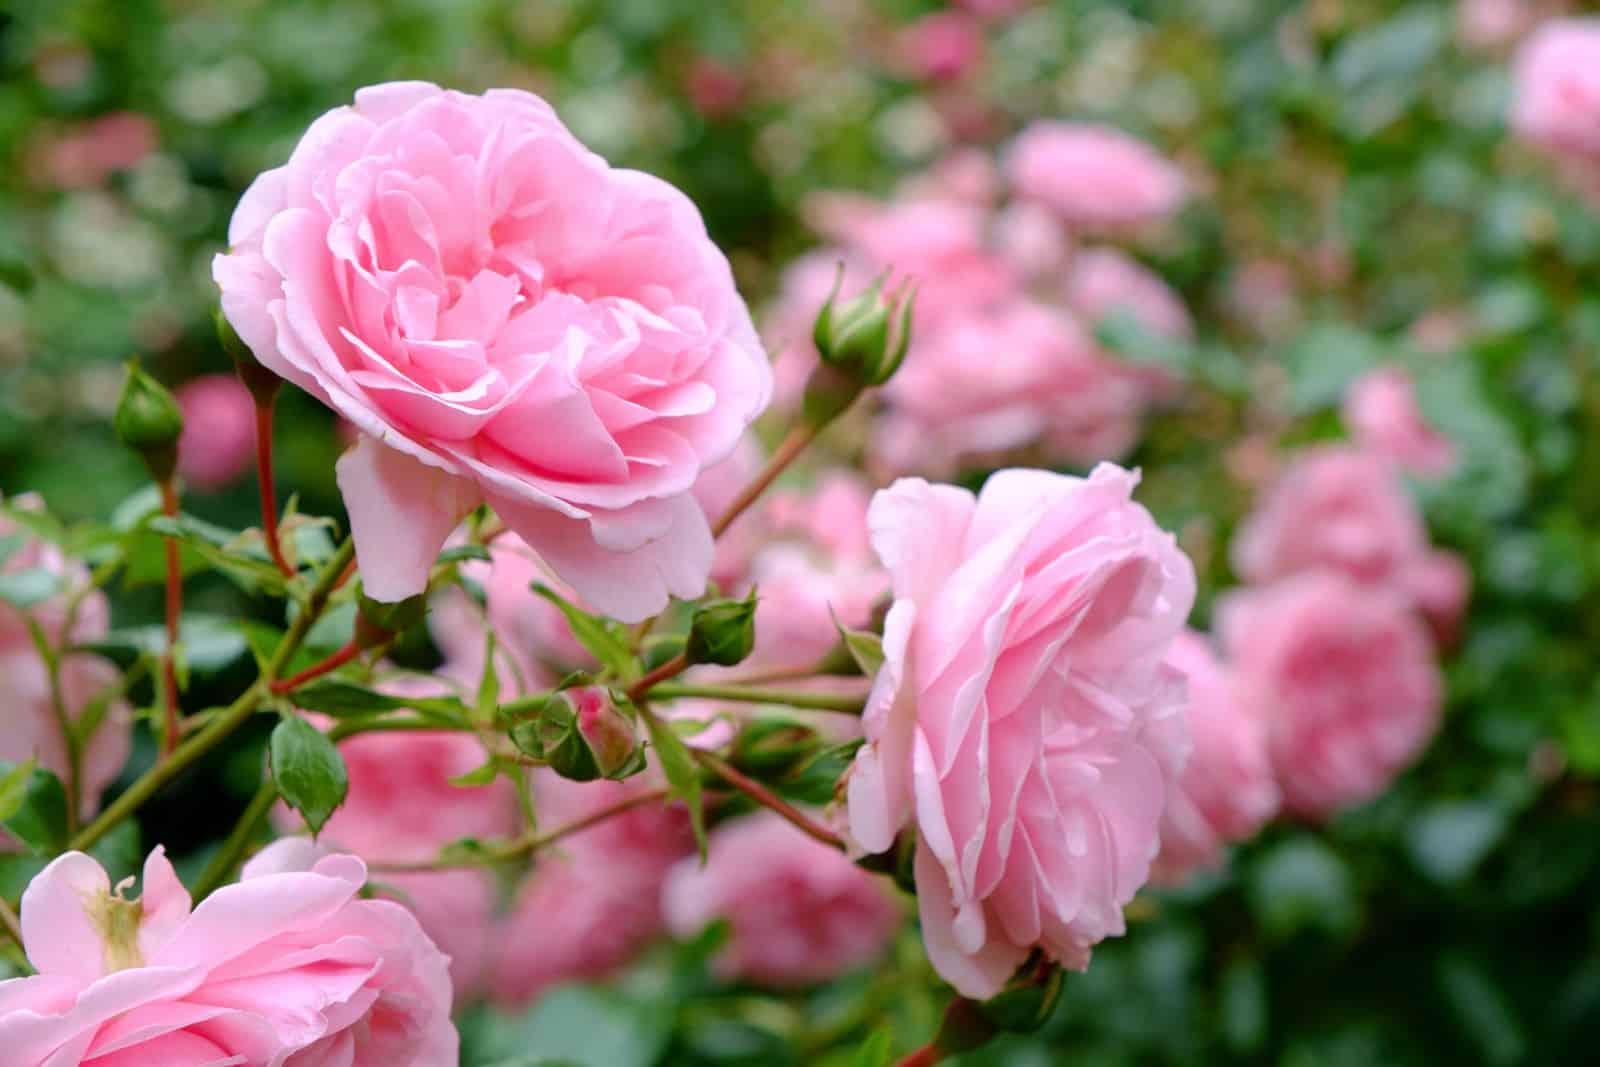 Tips for Growing Healthy Roses